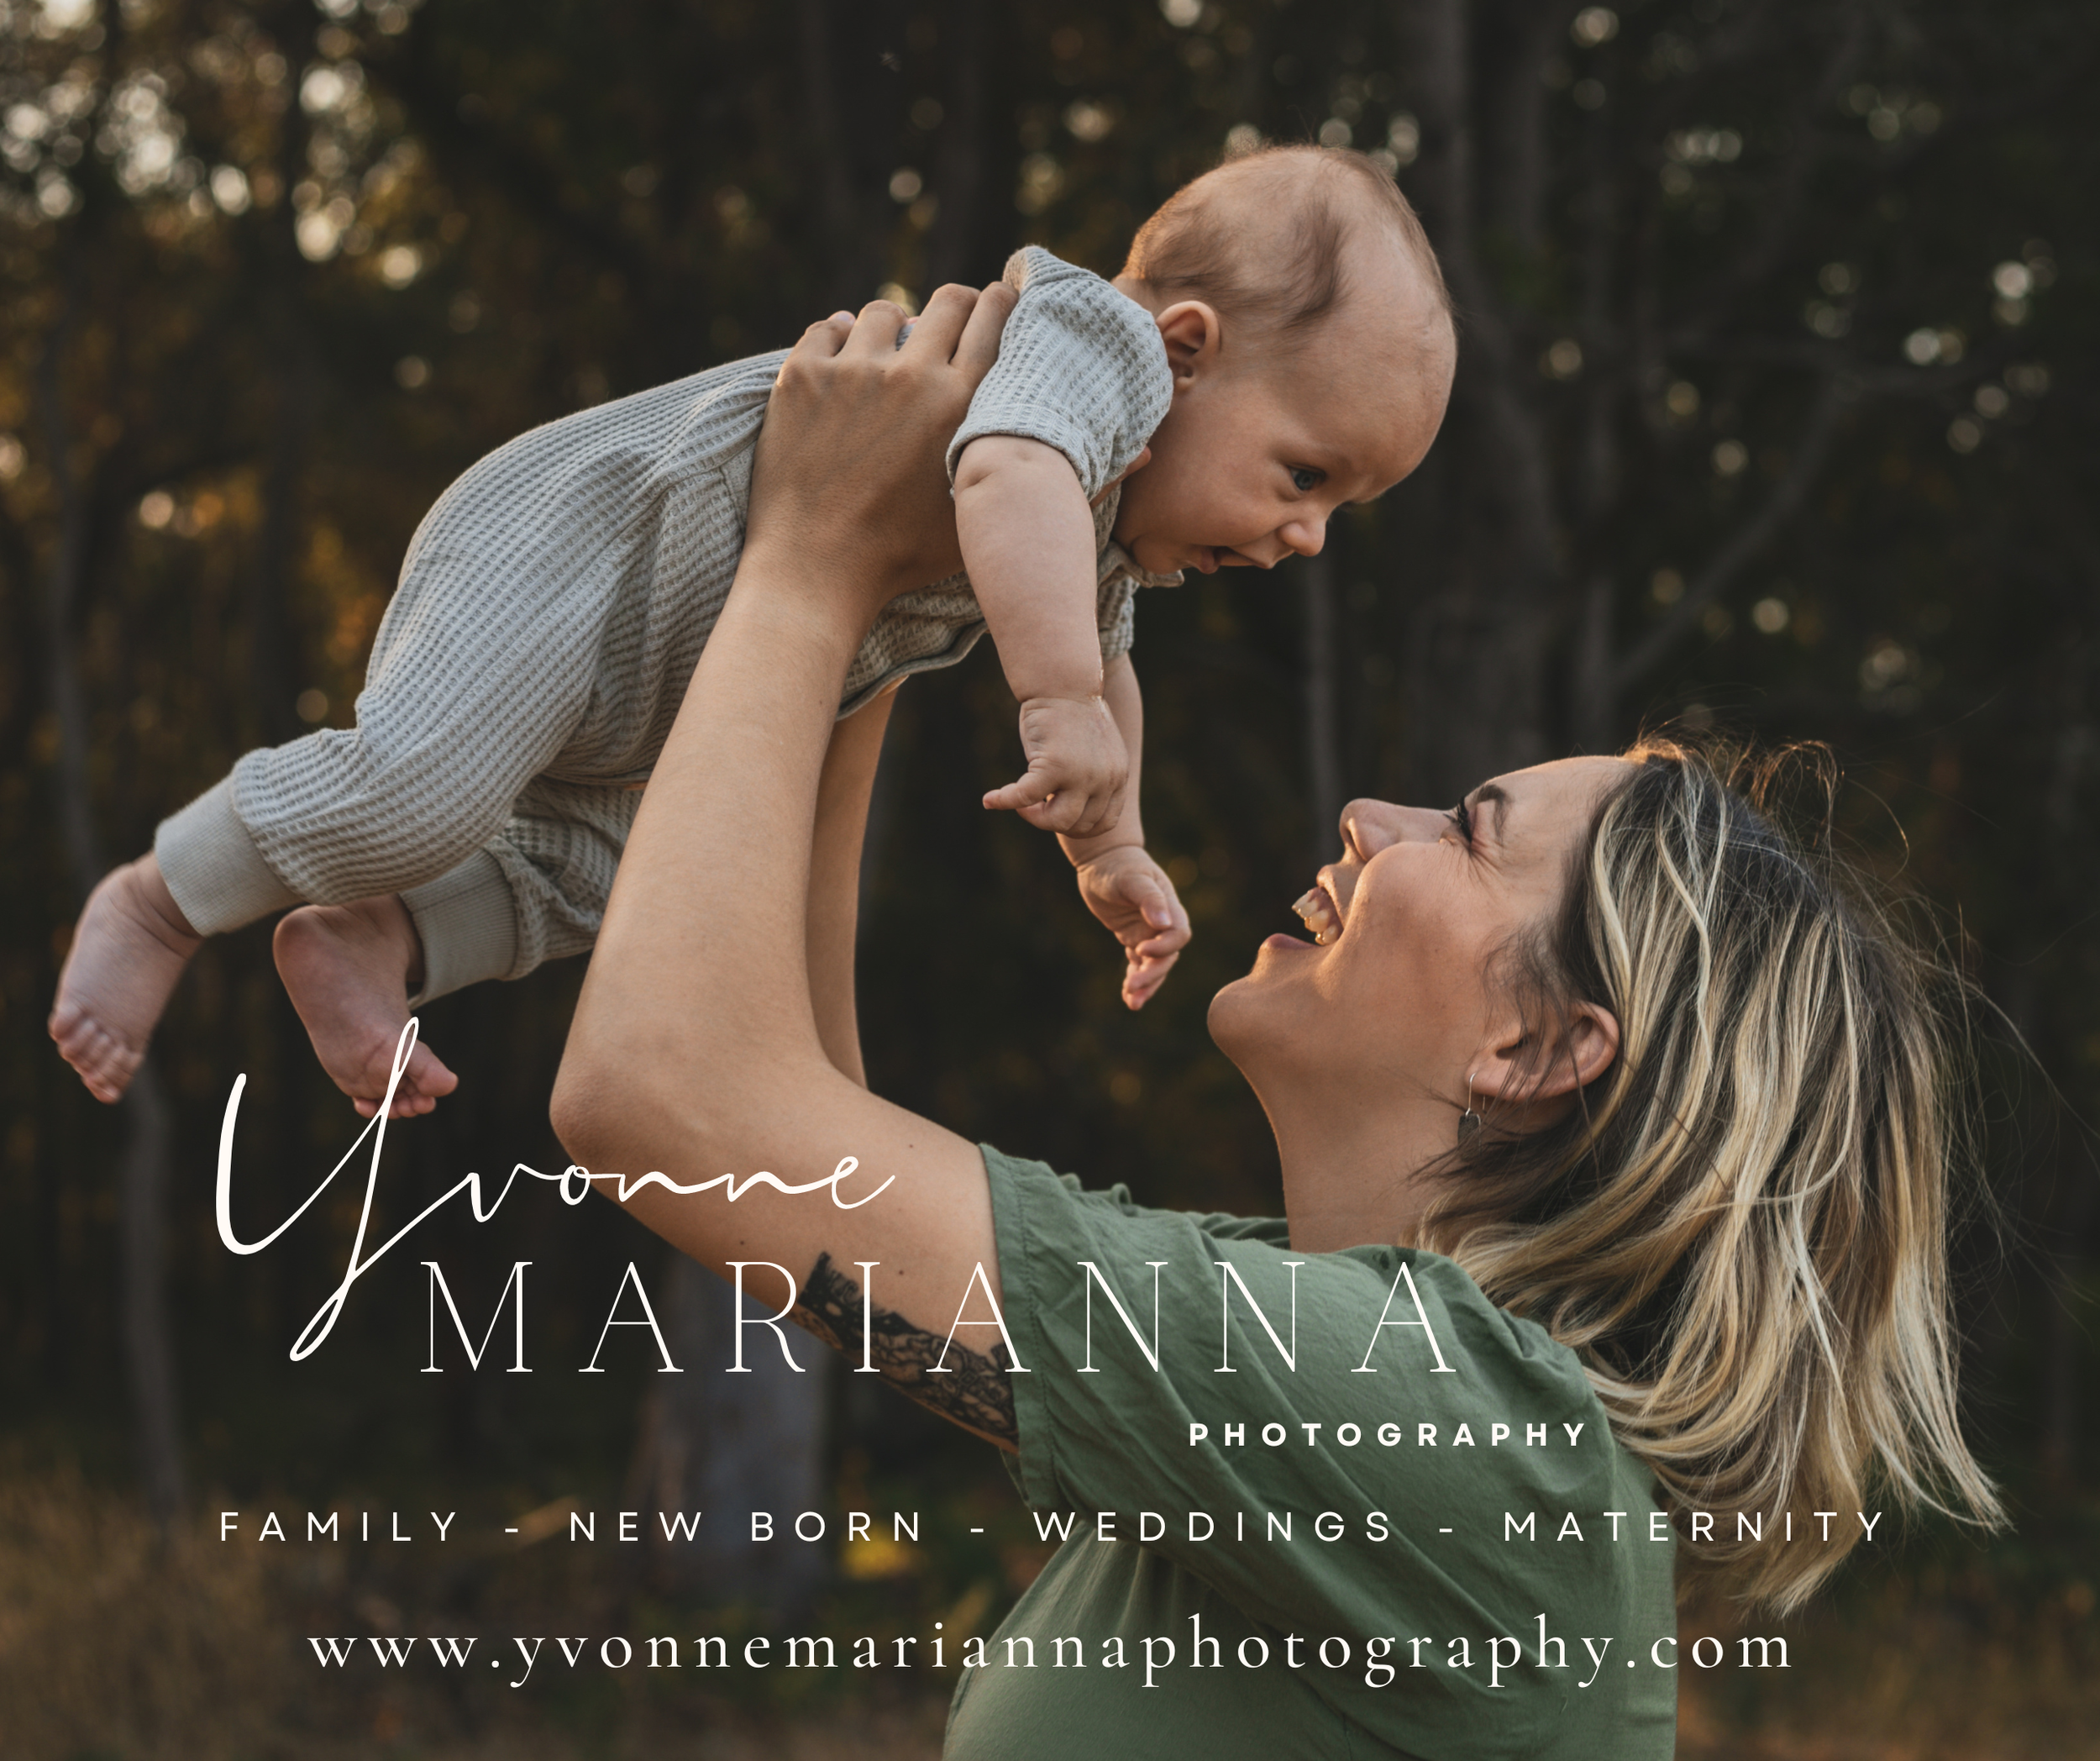 Yvonne Marianna Family Photography 2.png